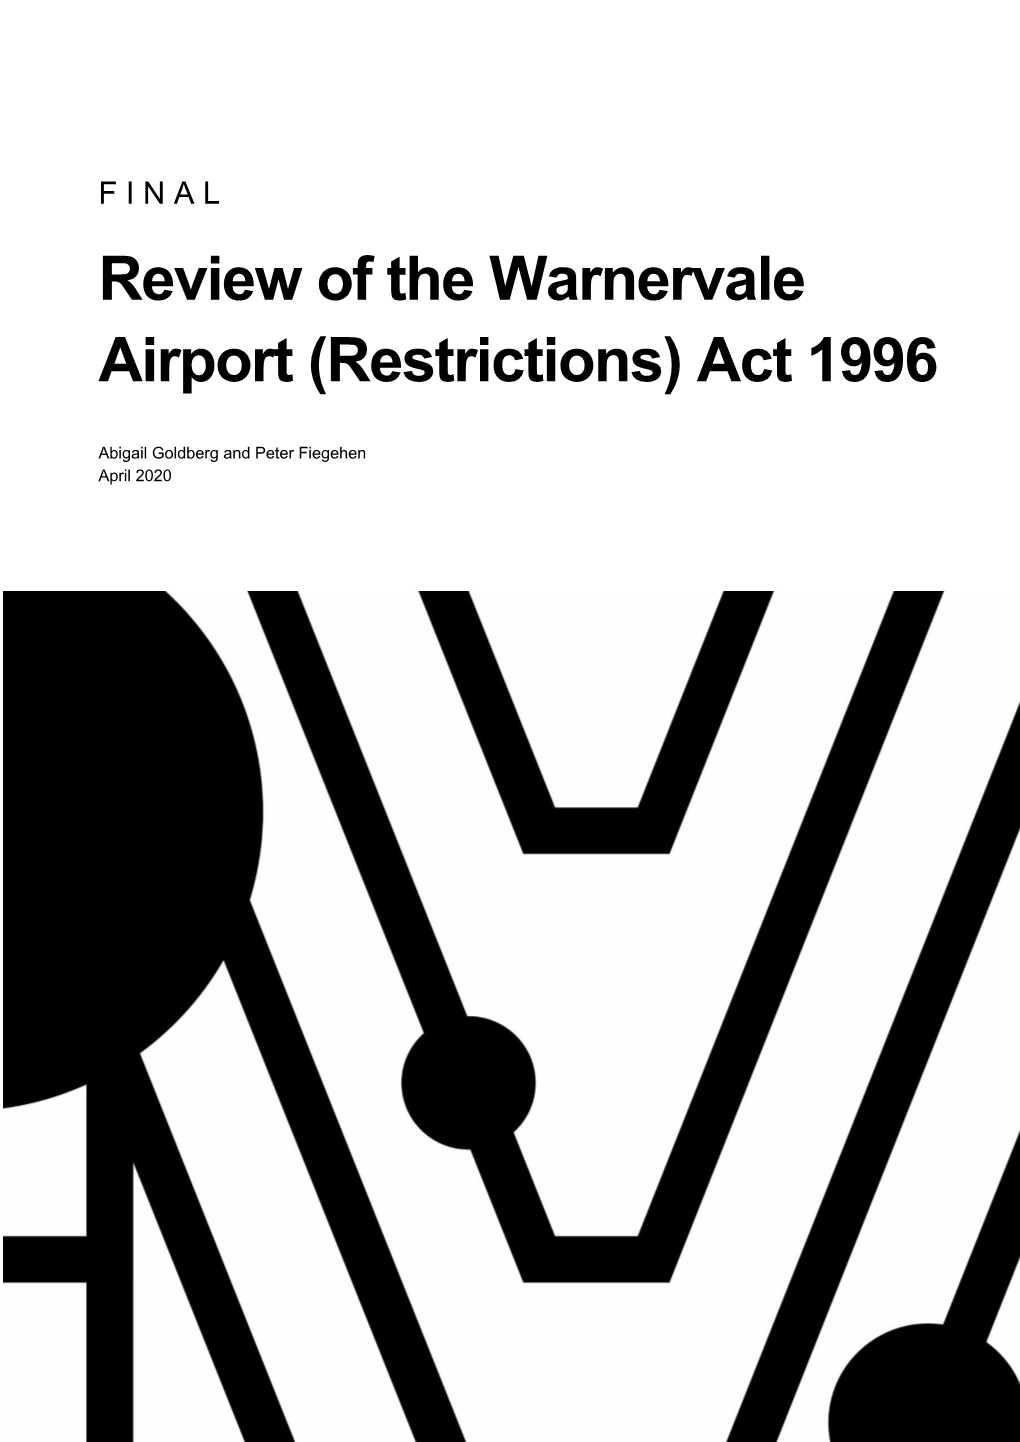 Review of the Warnervale Airport (Restrictions) Act 1996